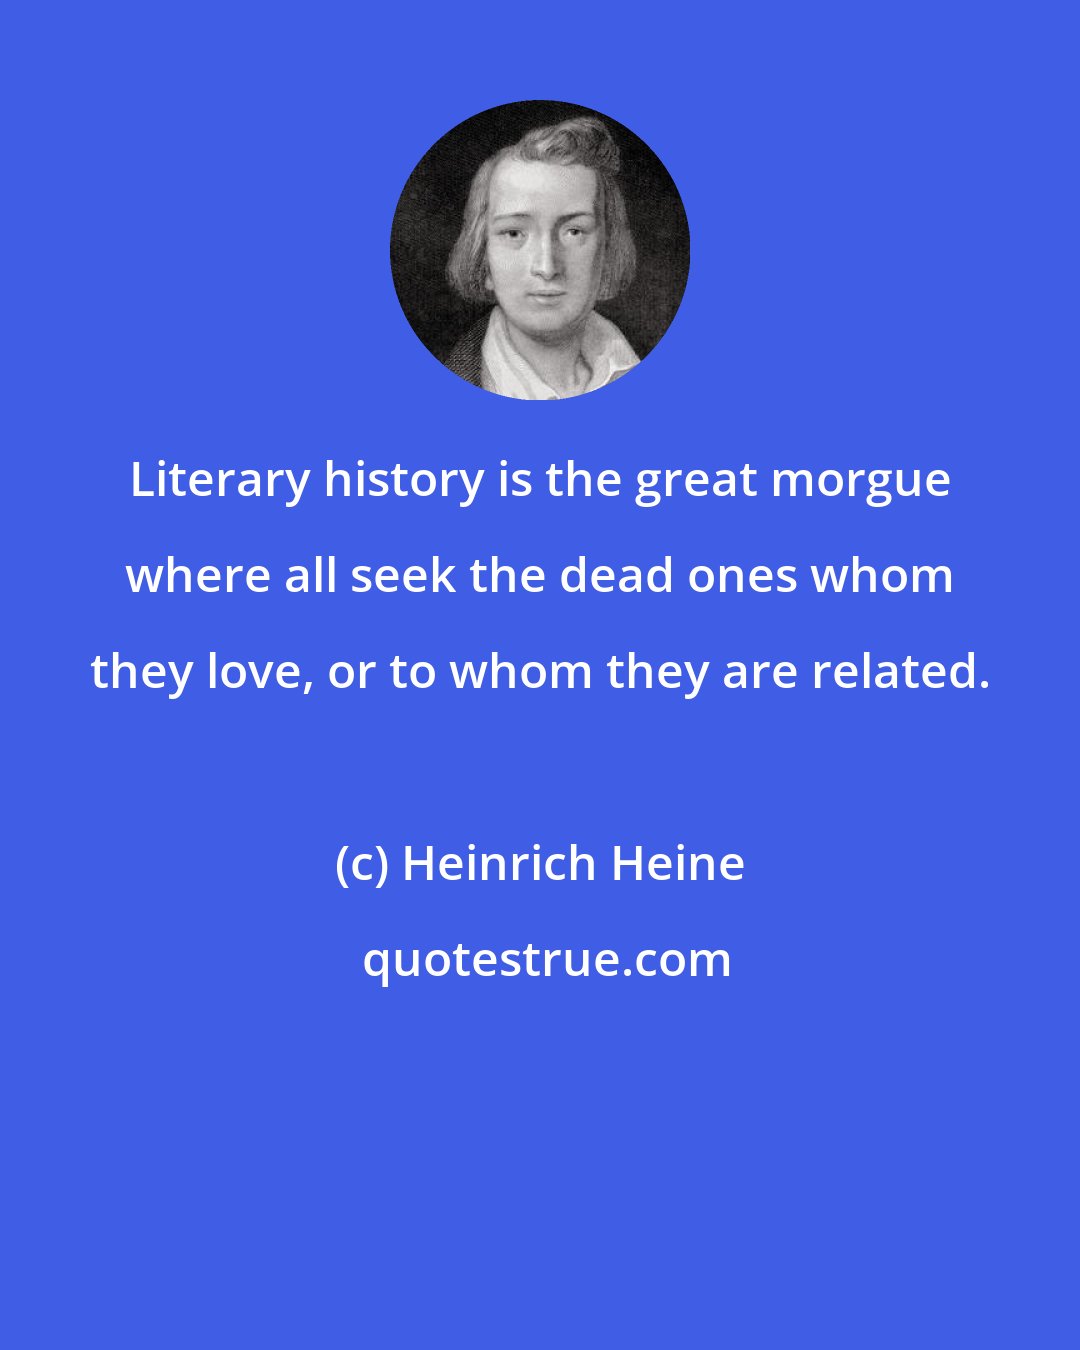 Heinrich Heine: Literary history is the great morgue where all seek the dead ones whom they love, or to whom they are related.